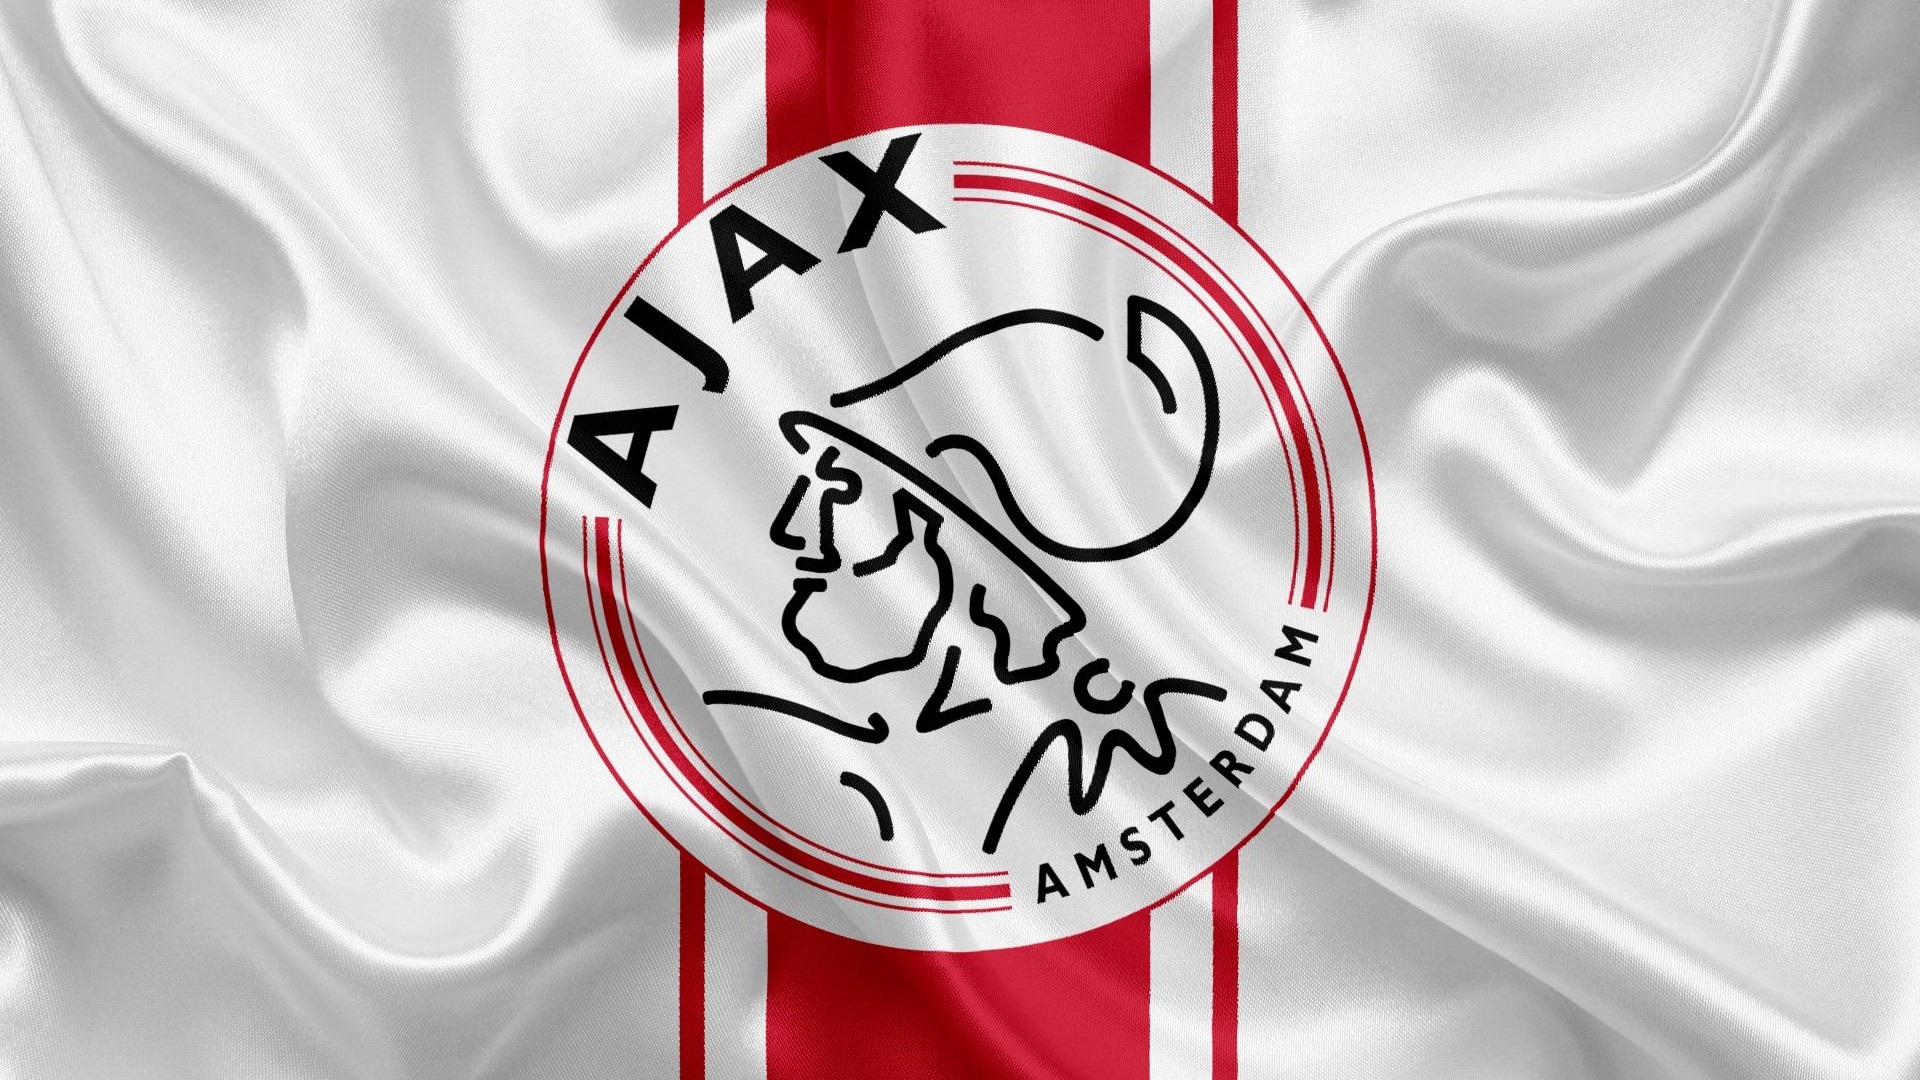 HD Wallpaper Ajax with high-resolution 1920x1080 pixel. You can use this wallpaper for your Desktop Computer Backgrounds, Mac Wallpapers, Android Lock screen or iPhone Screensavers and another smartphone device